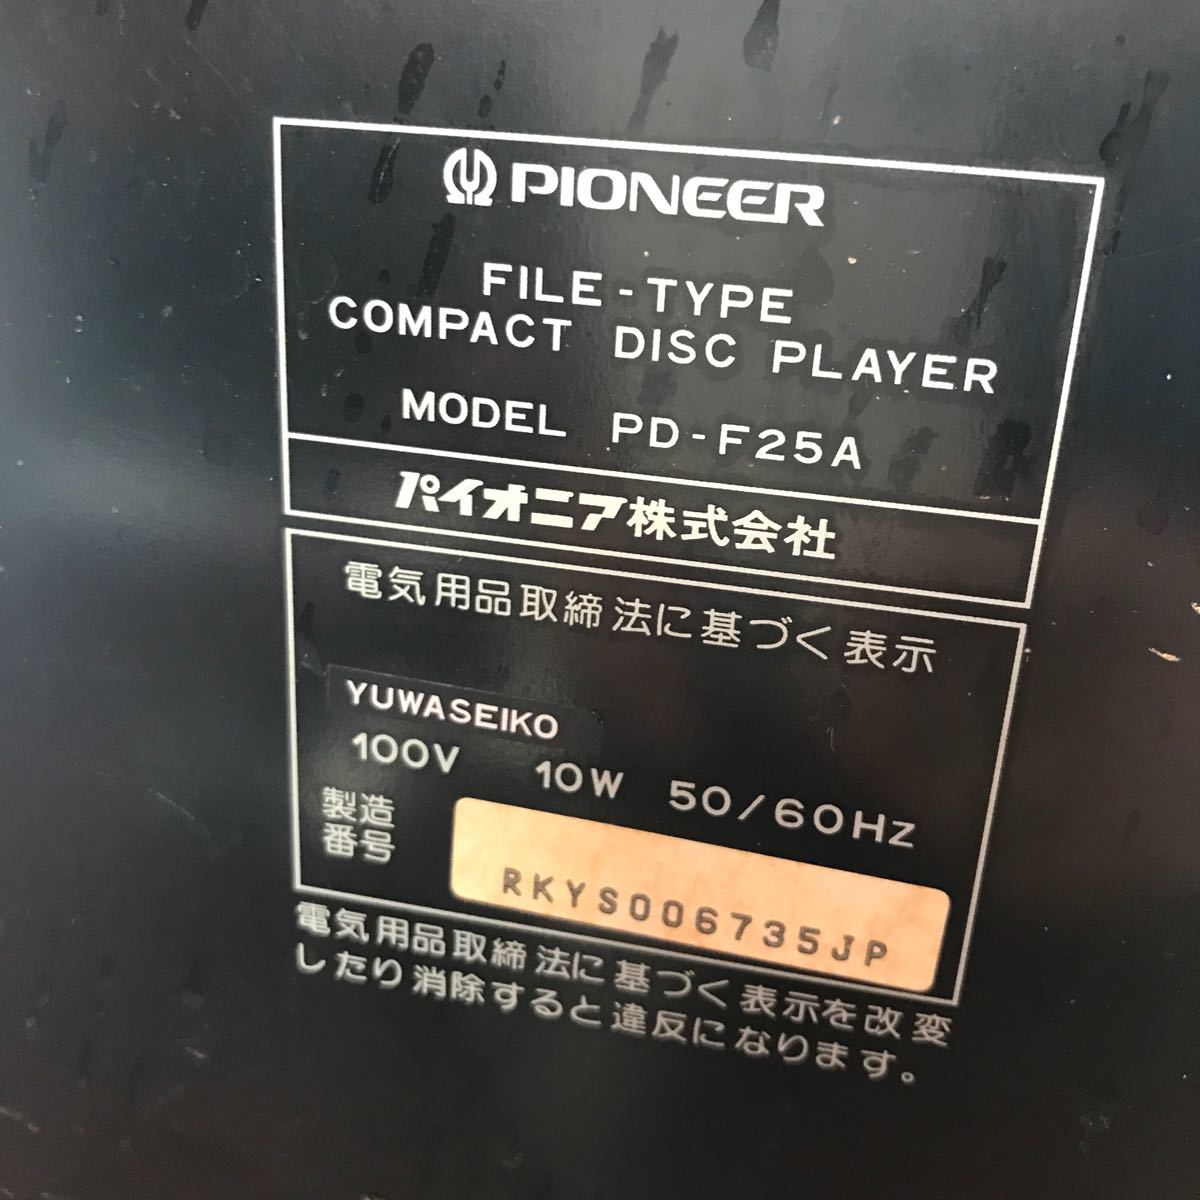 Pioneer FILE-TYPE COMPACT DISC PLAYER PD-F25Aチェンジャー パイオニア CD _画像5